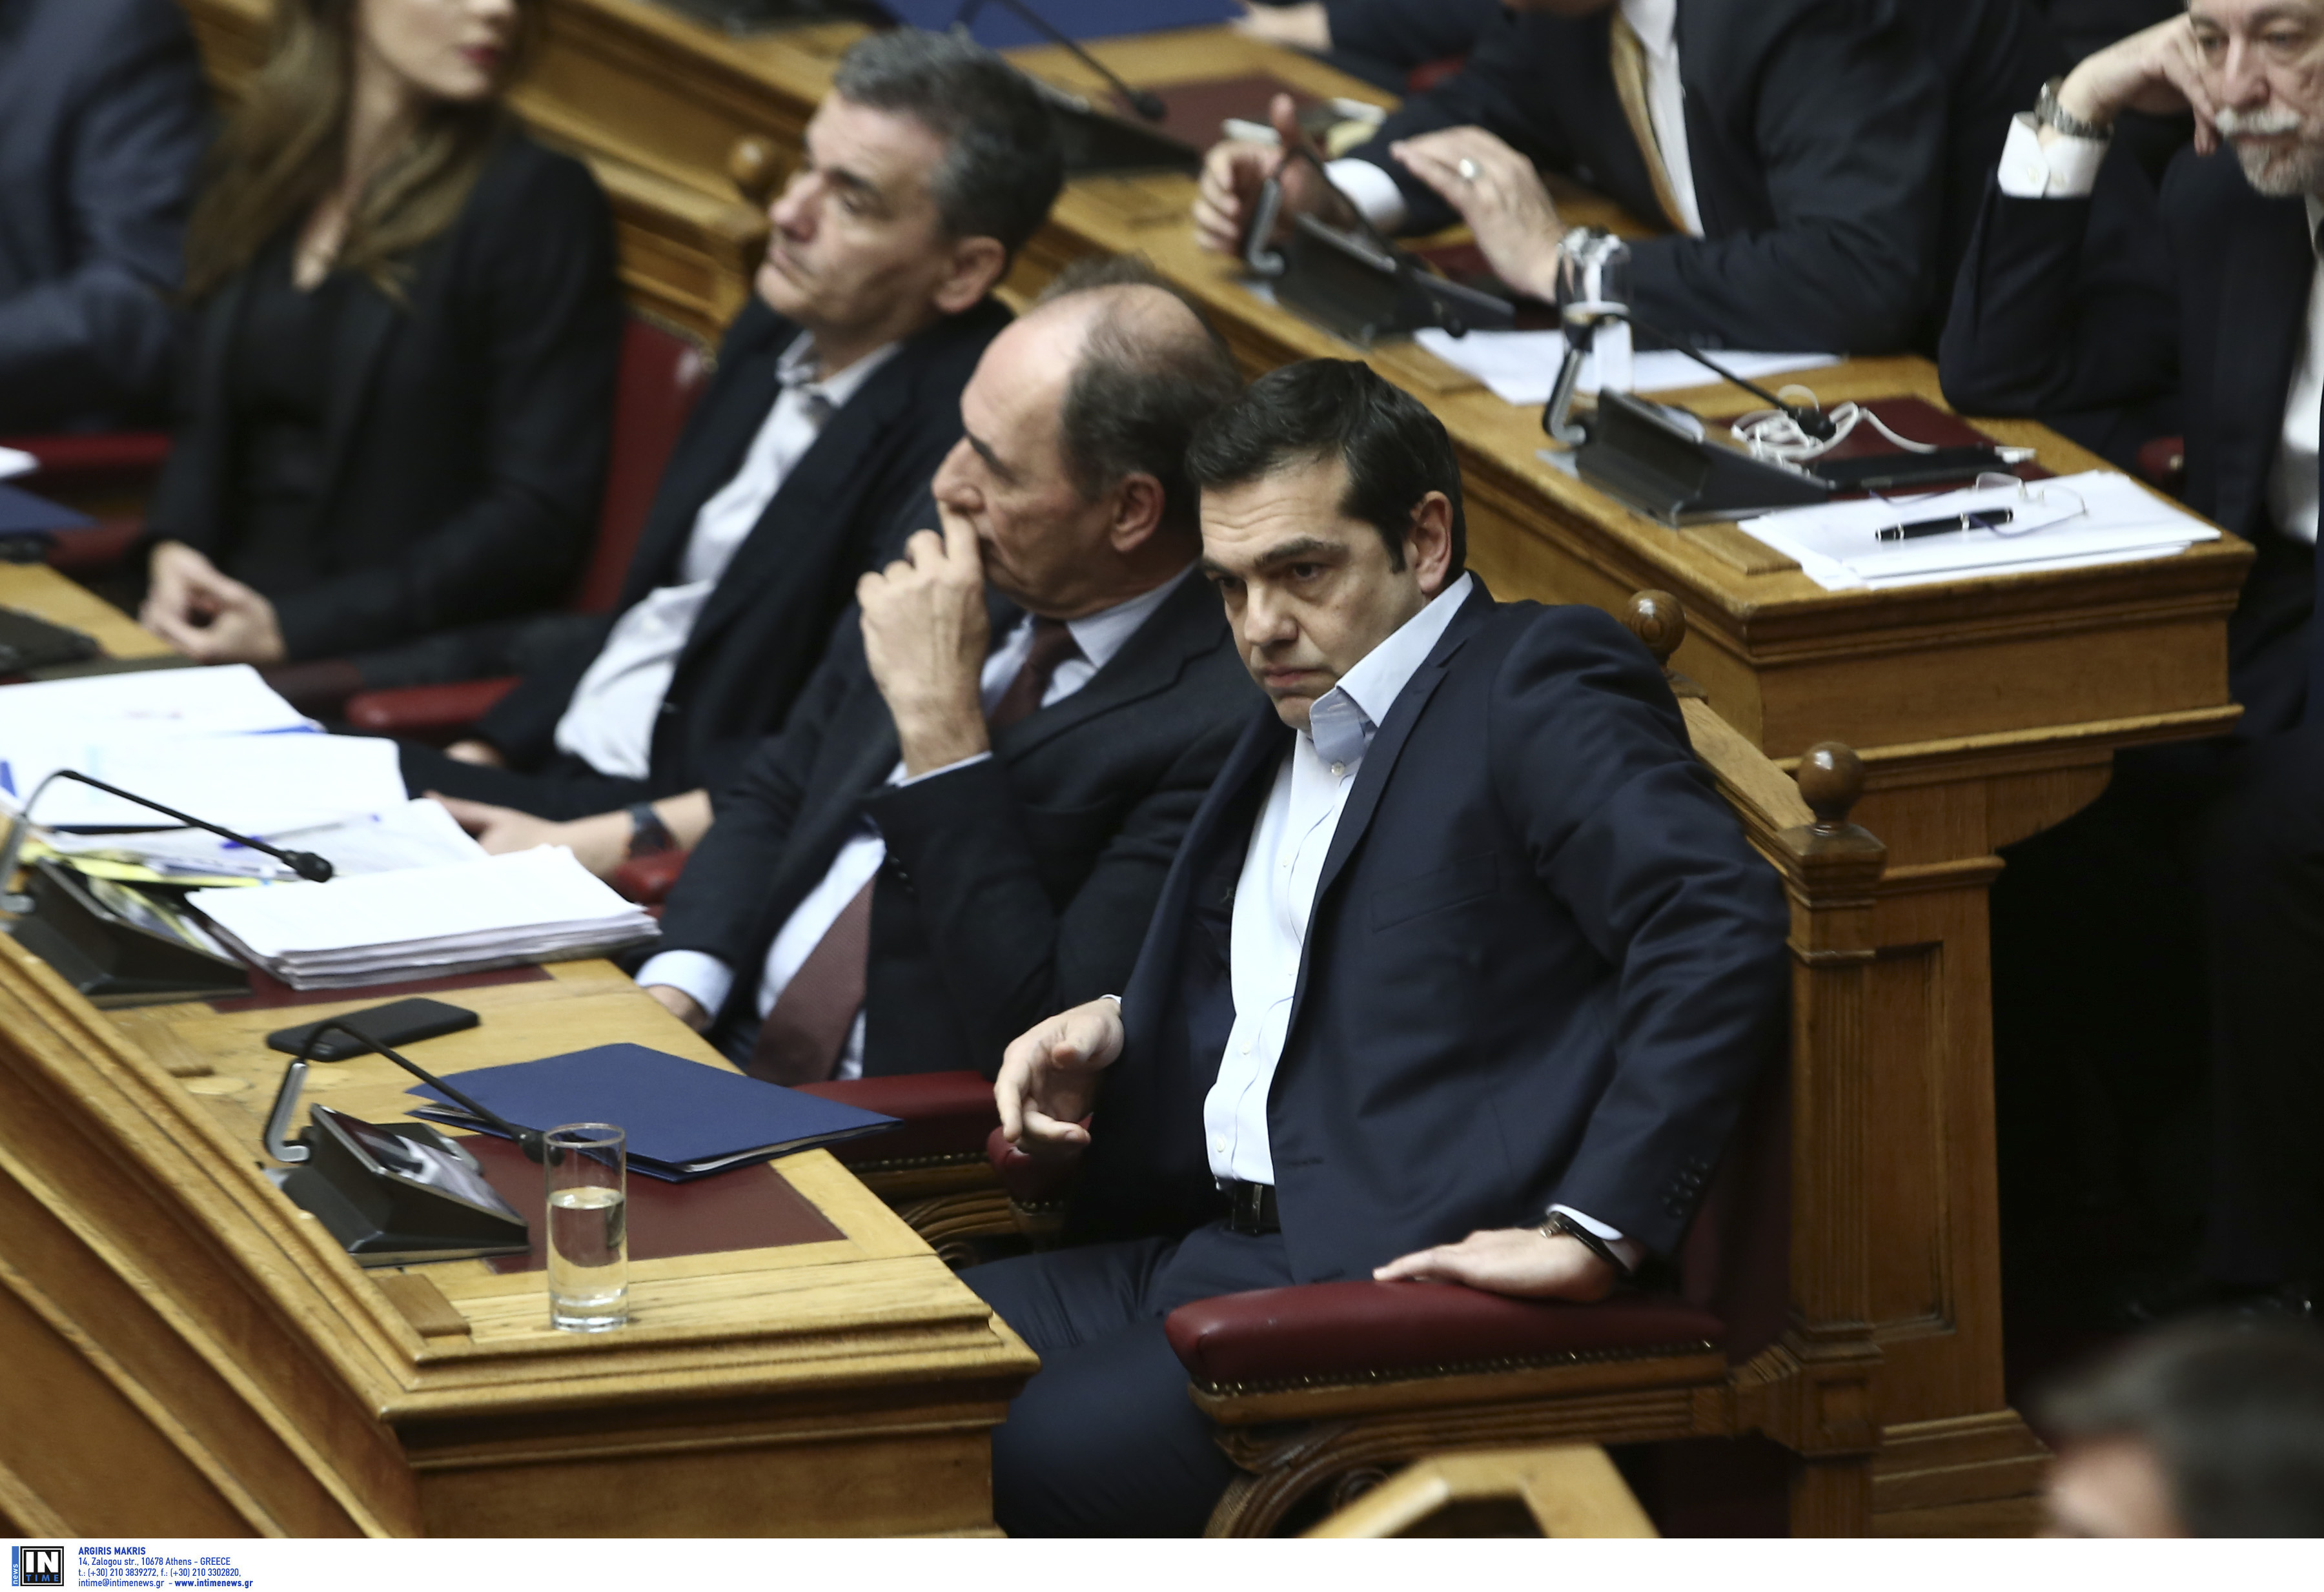 Under fire from right, left, Tsipras defends deal with creditors